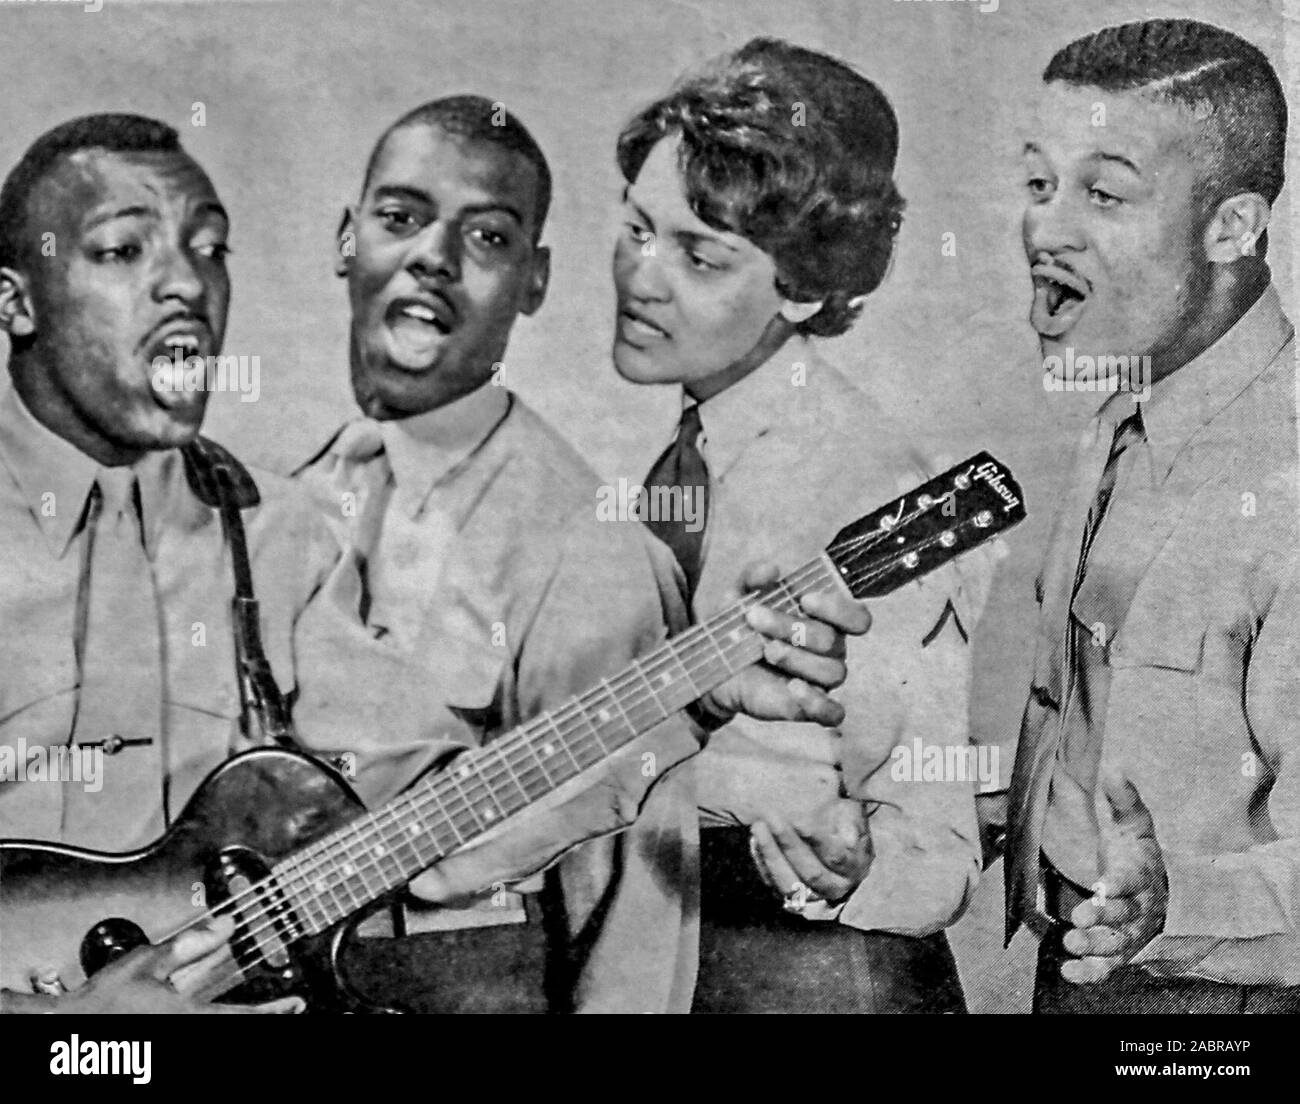 the-swinging-essex-pooling-their-voices-these-four-camp-lejeune-marines-left-to-right-lcpl-walter-vickers-pfcs-billy-hill-anita-humes-and-rudy-johnson-make-up-the-singin-swingin-team-of-the-essex-breaking-into-the-recording-field-with-the-roulette-company-they-have-tentatively-scheduled-a-release-entitled-easier-said-than-done-and-are-you-goin-my-way-for-april-15-2ABRAYP.jpg